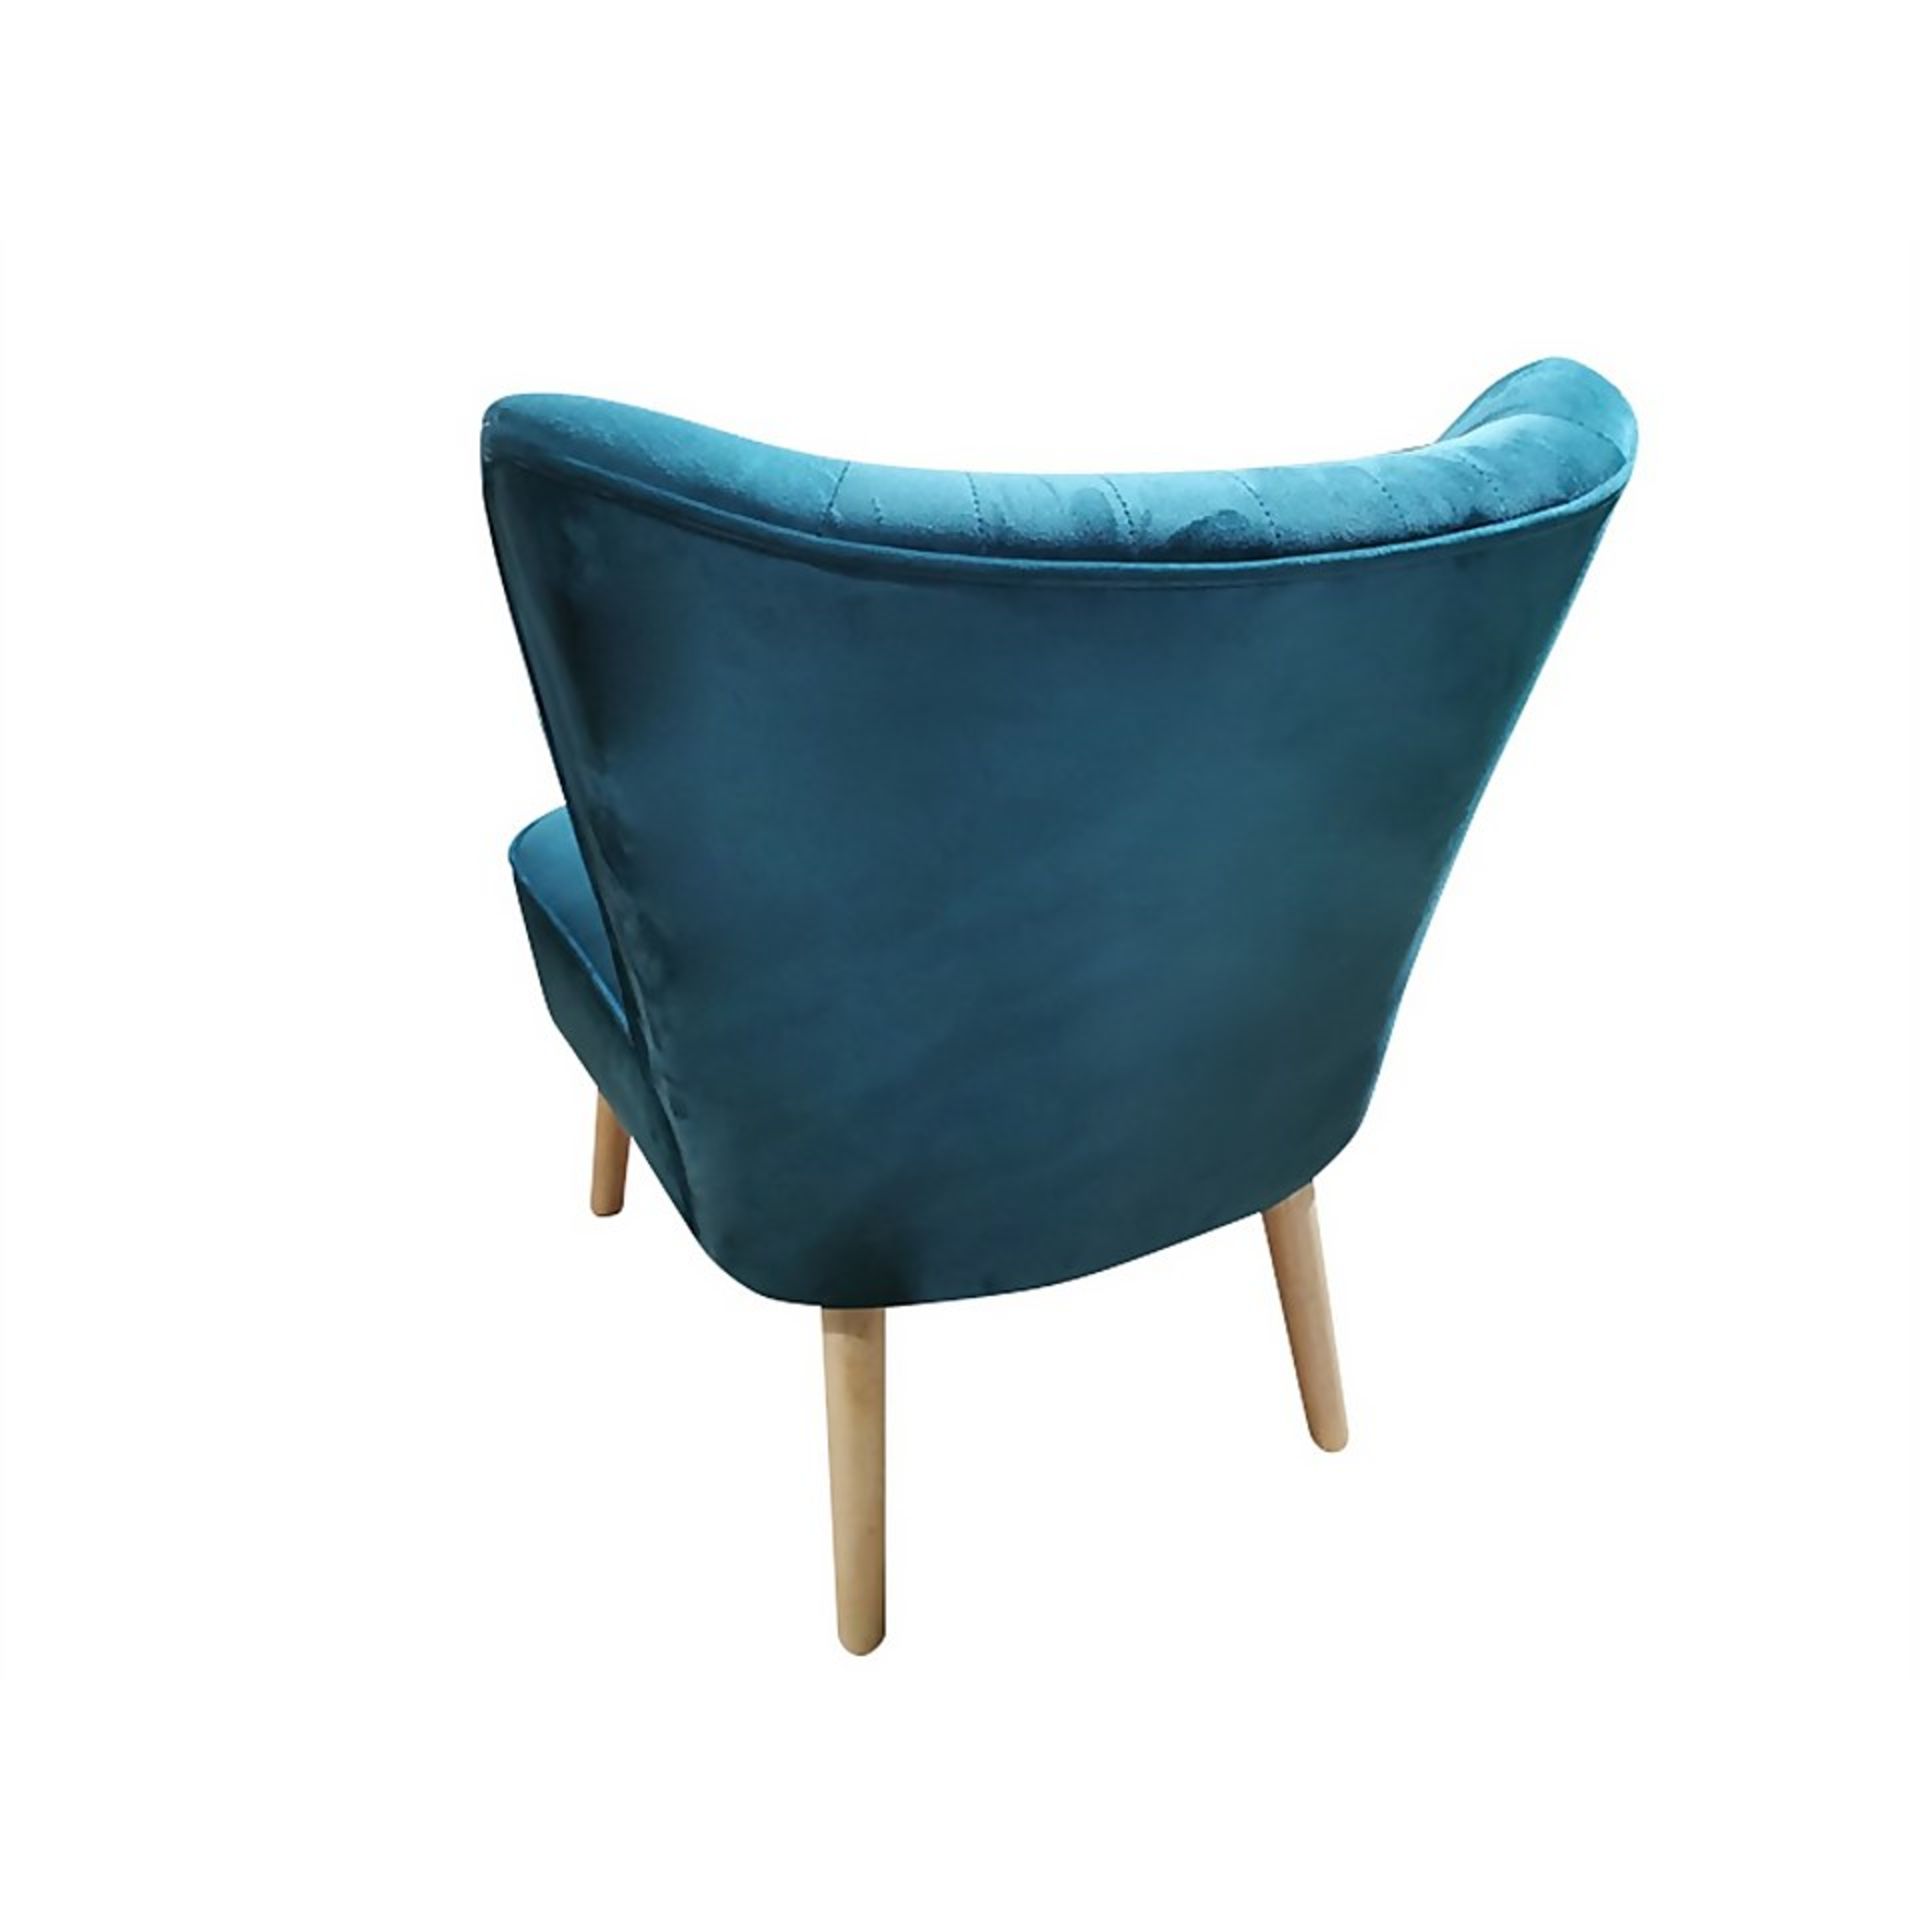 (R7M) 1 X Occasional Chair Teal. Velvet Fabric Cover. Rubberwood Legs. (H72xW60xD70cm) RRP £60 - Image 3 of 6